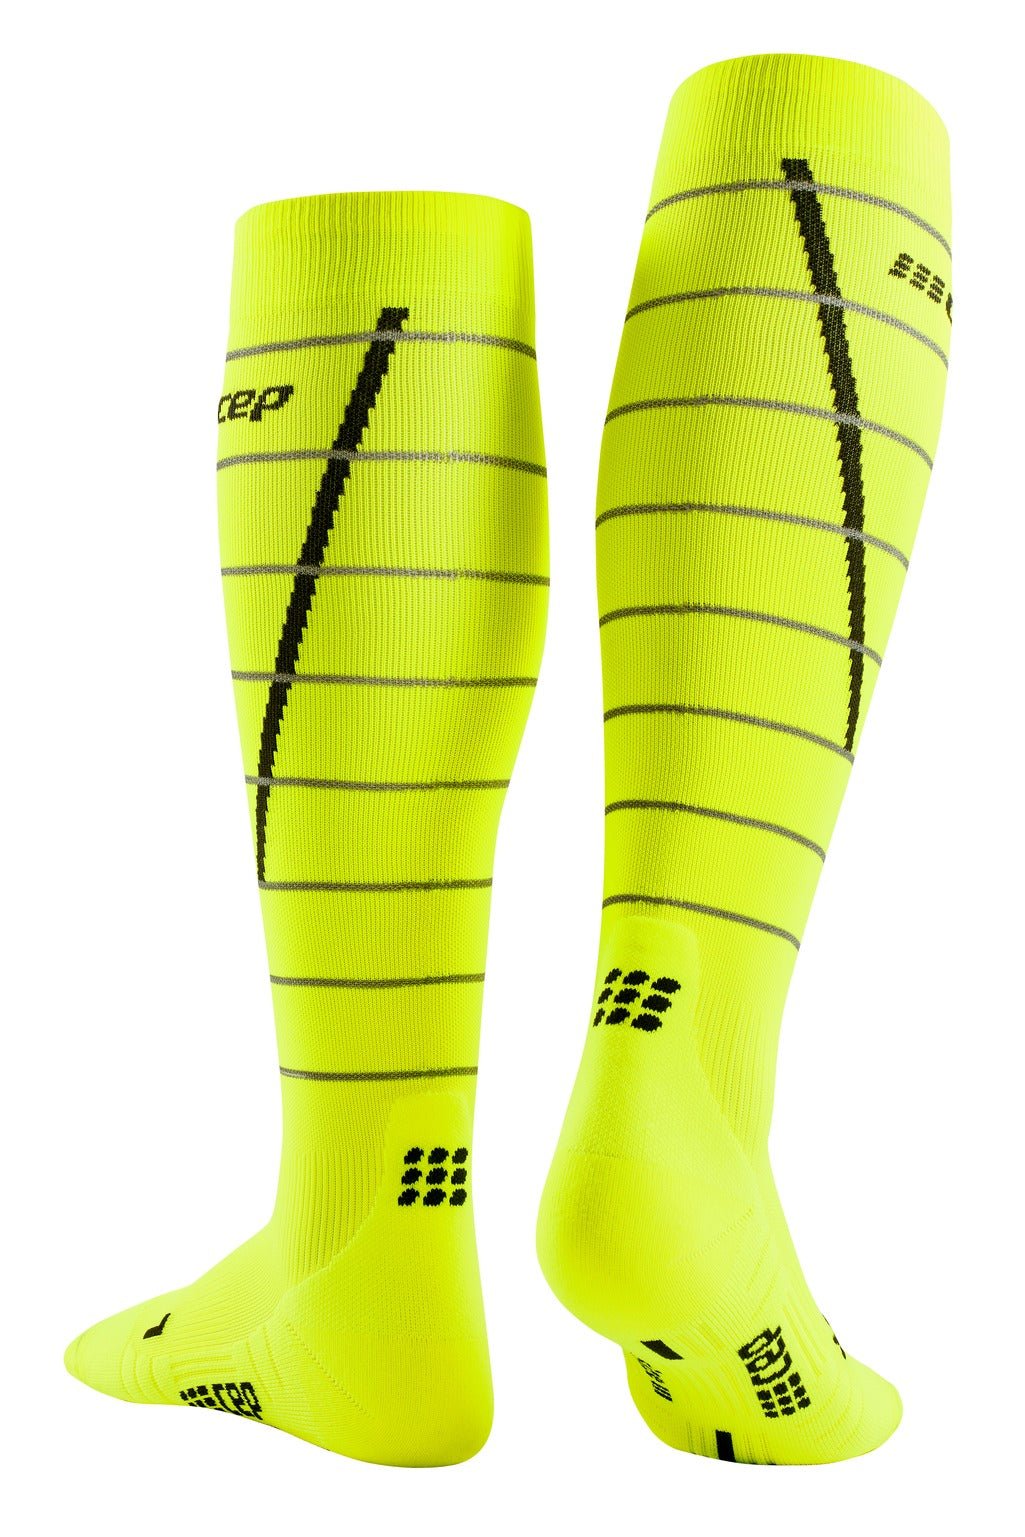 CEP - Reflective Compression Mid Cut Socks Men neon yellow at